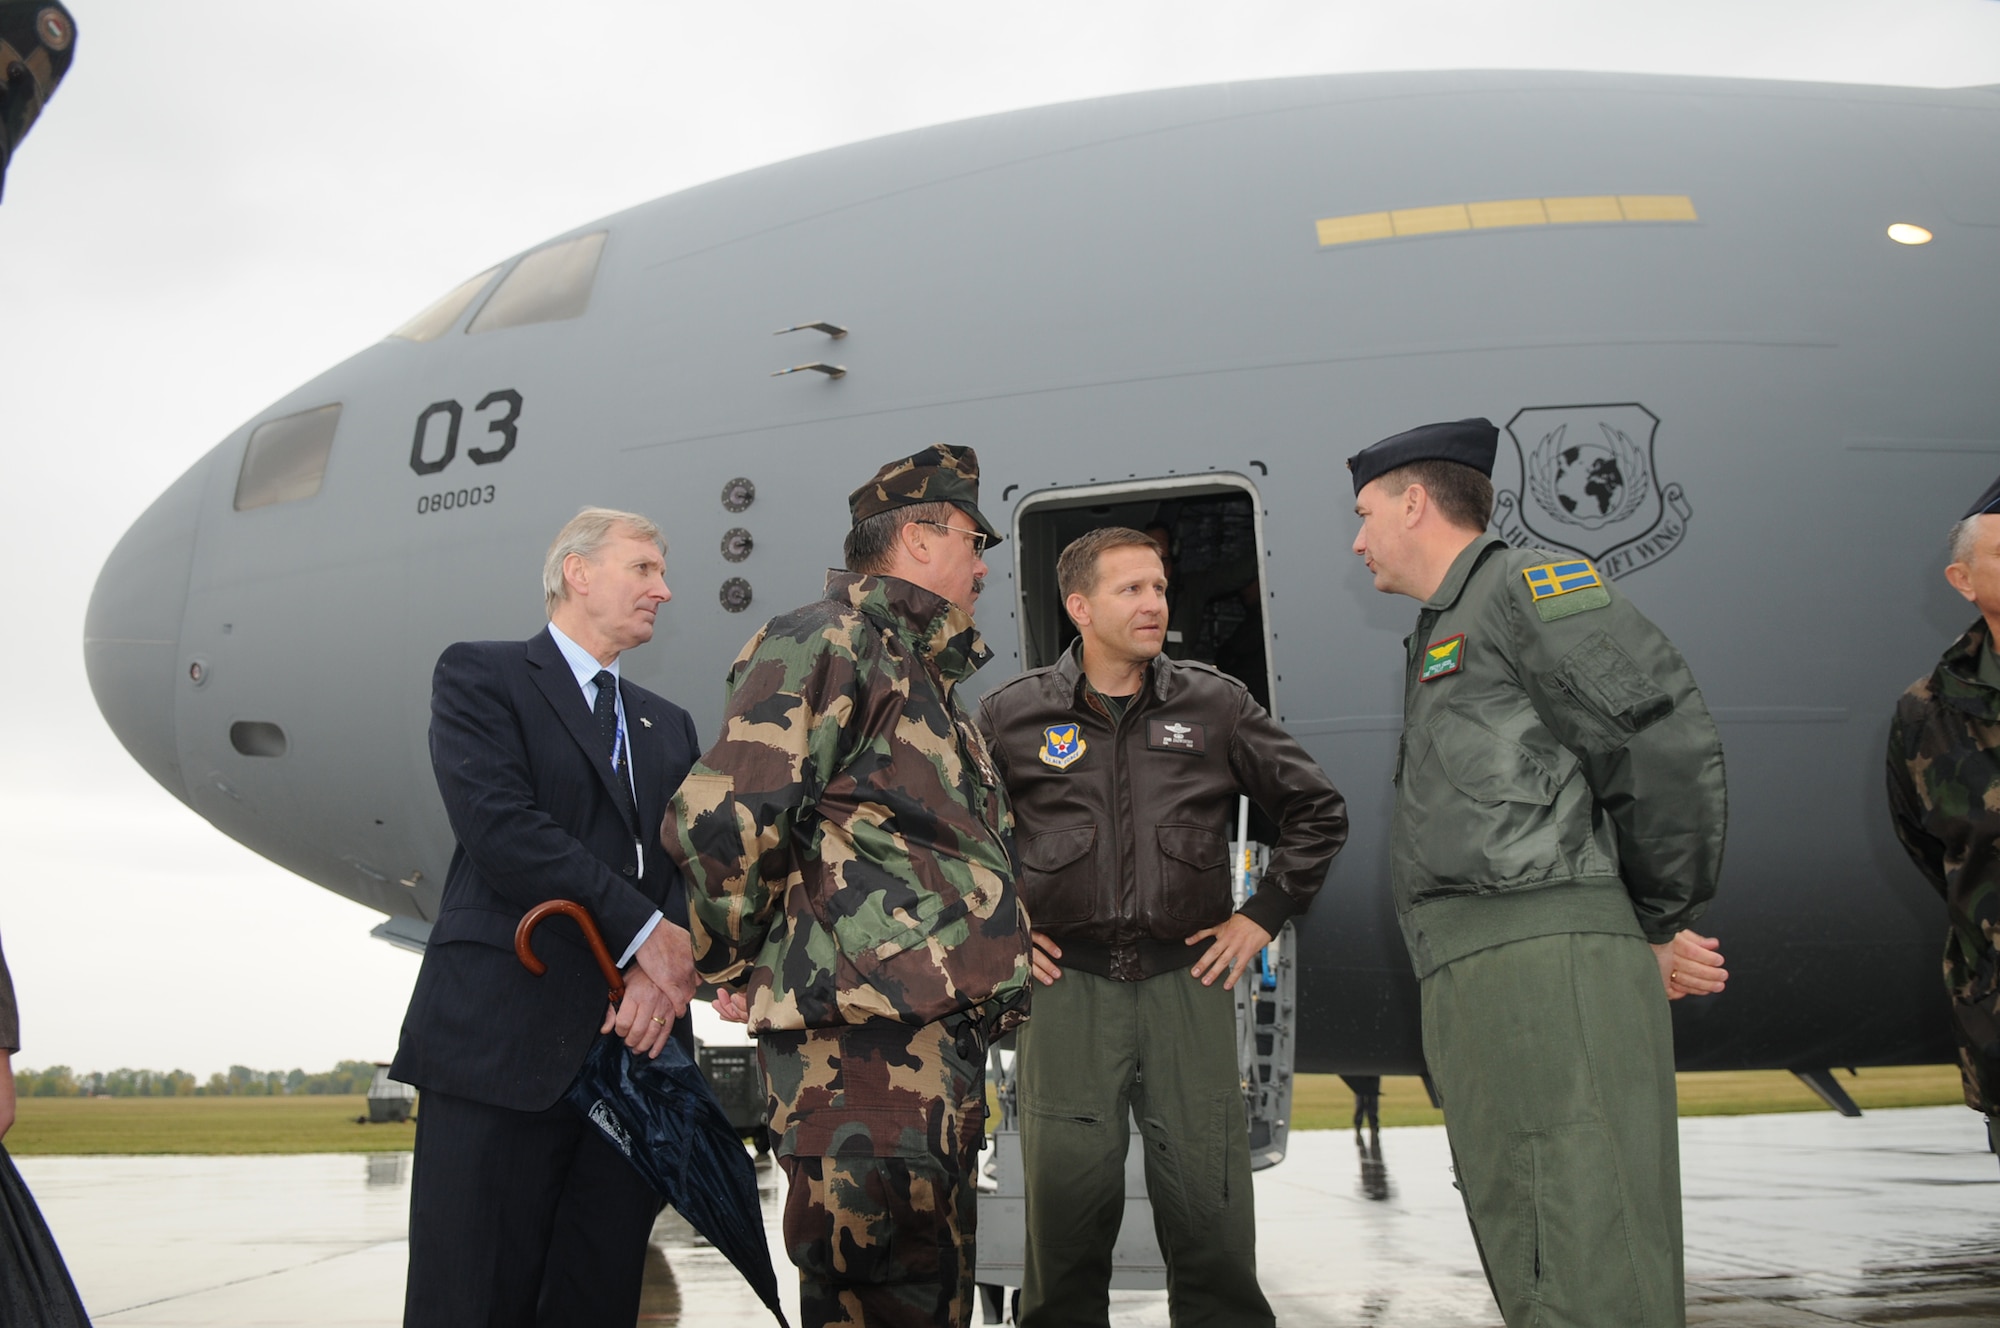 Col. John Zazworsky, Heavy Airlift Wing commander (center right), met with Swedish Col. Fredrik Heden, HAW vice commander (right), General Laszlo Tombol, Hungarian Chief of Defense (center left), and Gunnar Borch, NATO Airlift Management Agency general manager, after the delivery of the third and final C-17 Globemaster III on Oct. 12, 2009 at Papa Air Base, Hungary.  The wing’s purpose is to collectively create a heavy airlift solution with global reach to meet national obligations to the European Union, NATO and U.N. (U.S. Air Force photo/Staff Sgt. Mercedes Crossland)